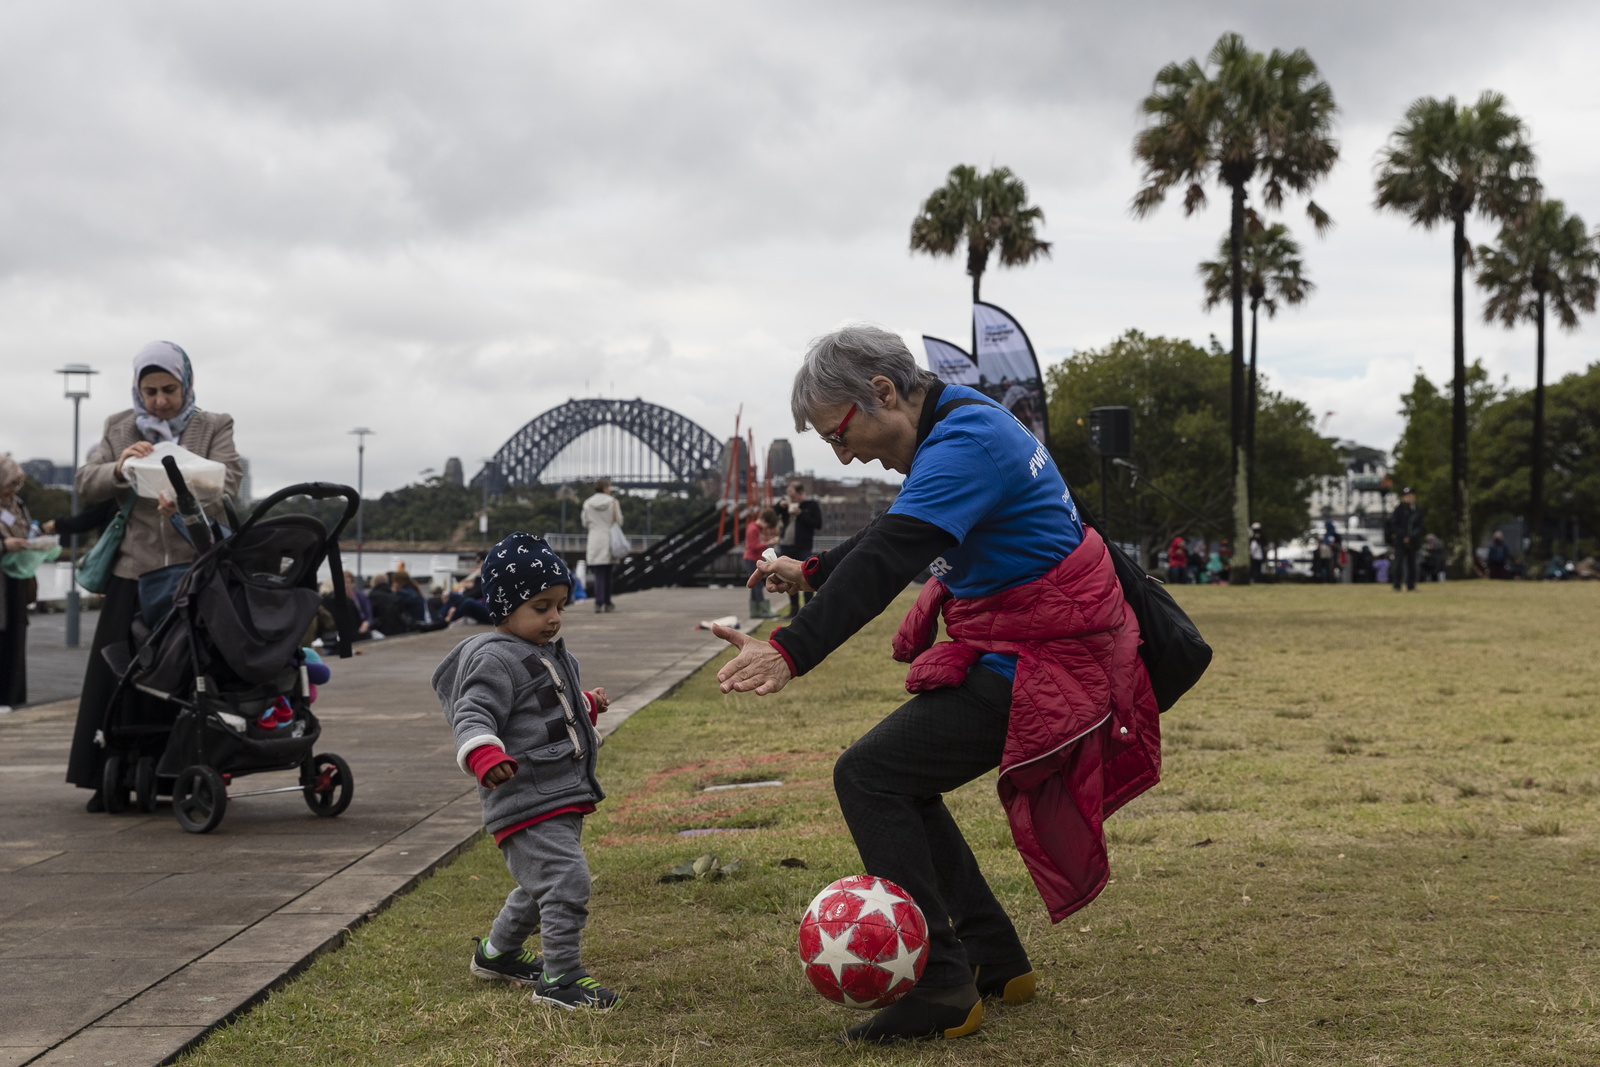 Spontaneous games of football breakout as Australians walk together with their neighbours from refugee backgrounds around Sydney harbour to celebrate World Refugee Day.